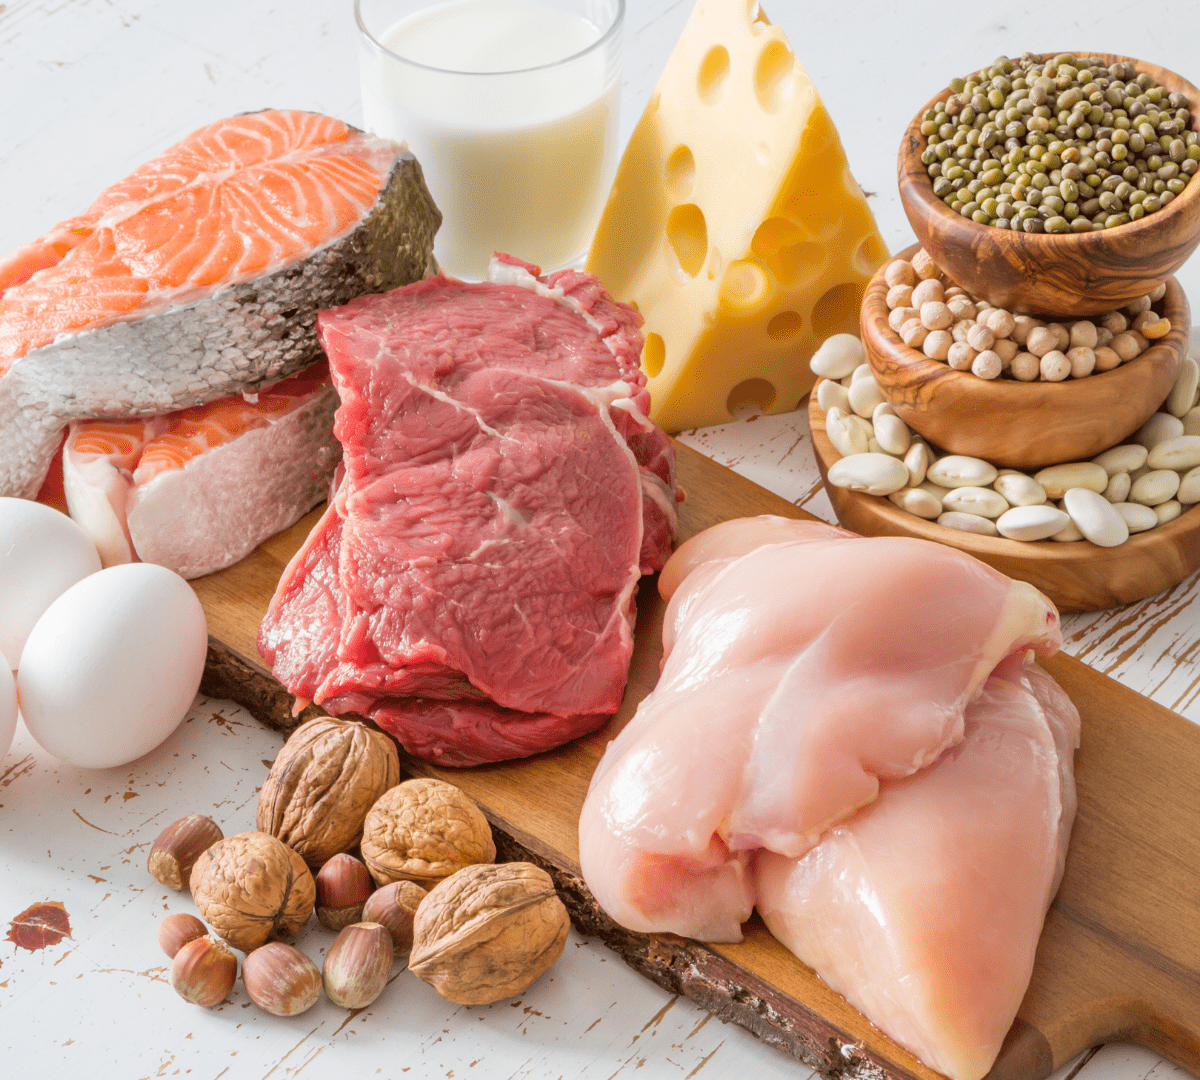 The Rabbit Hole: How Much Protein Per Meal?